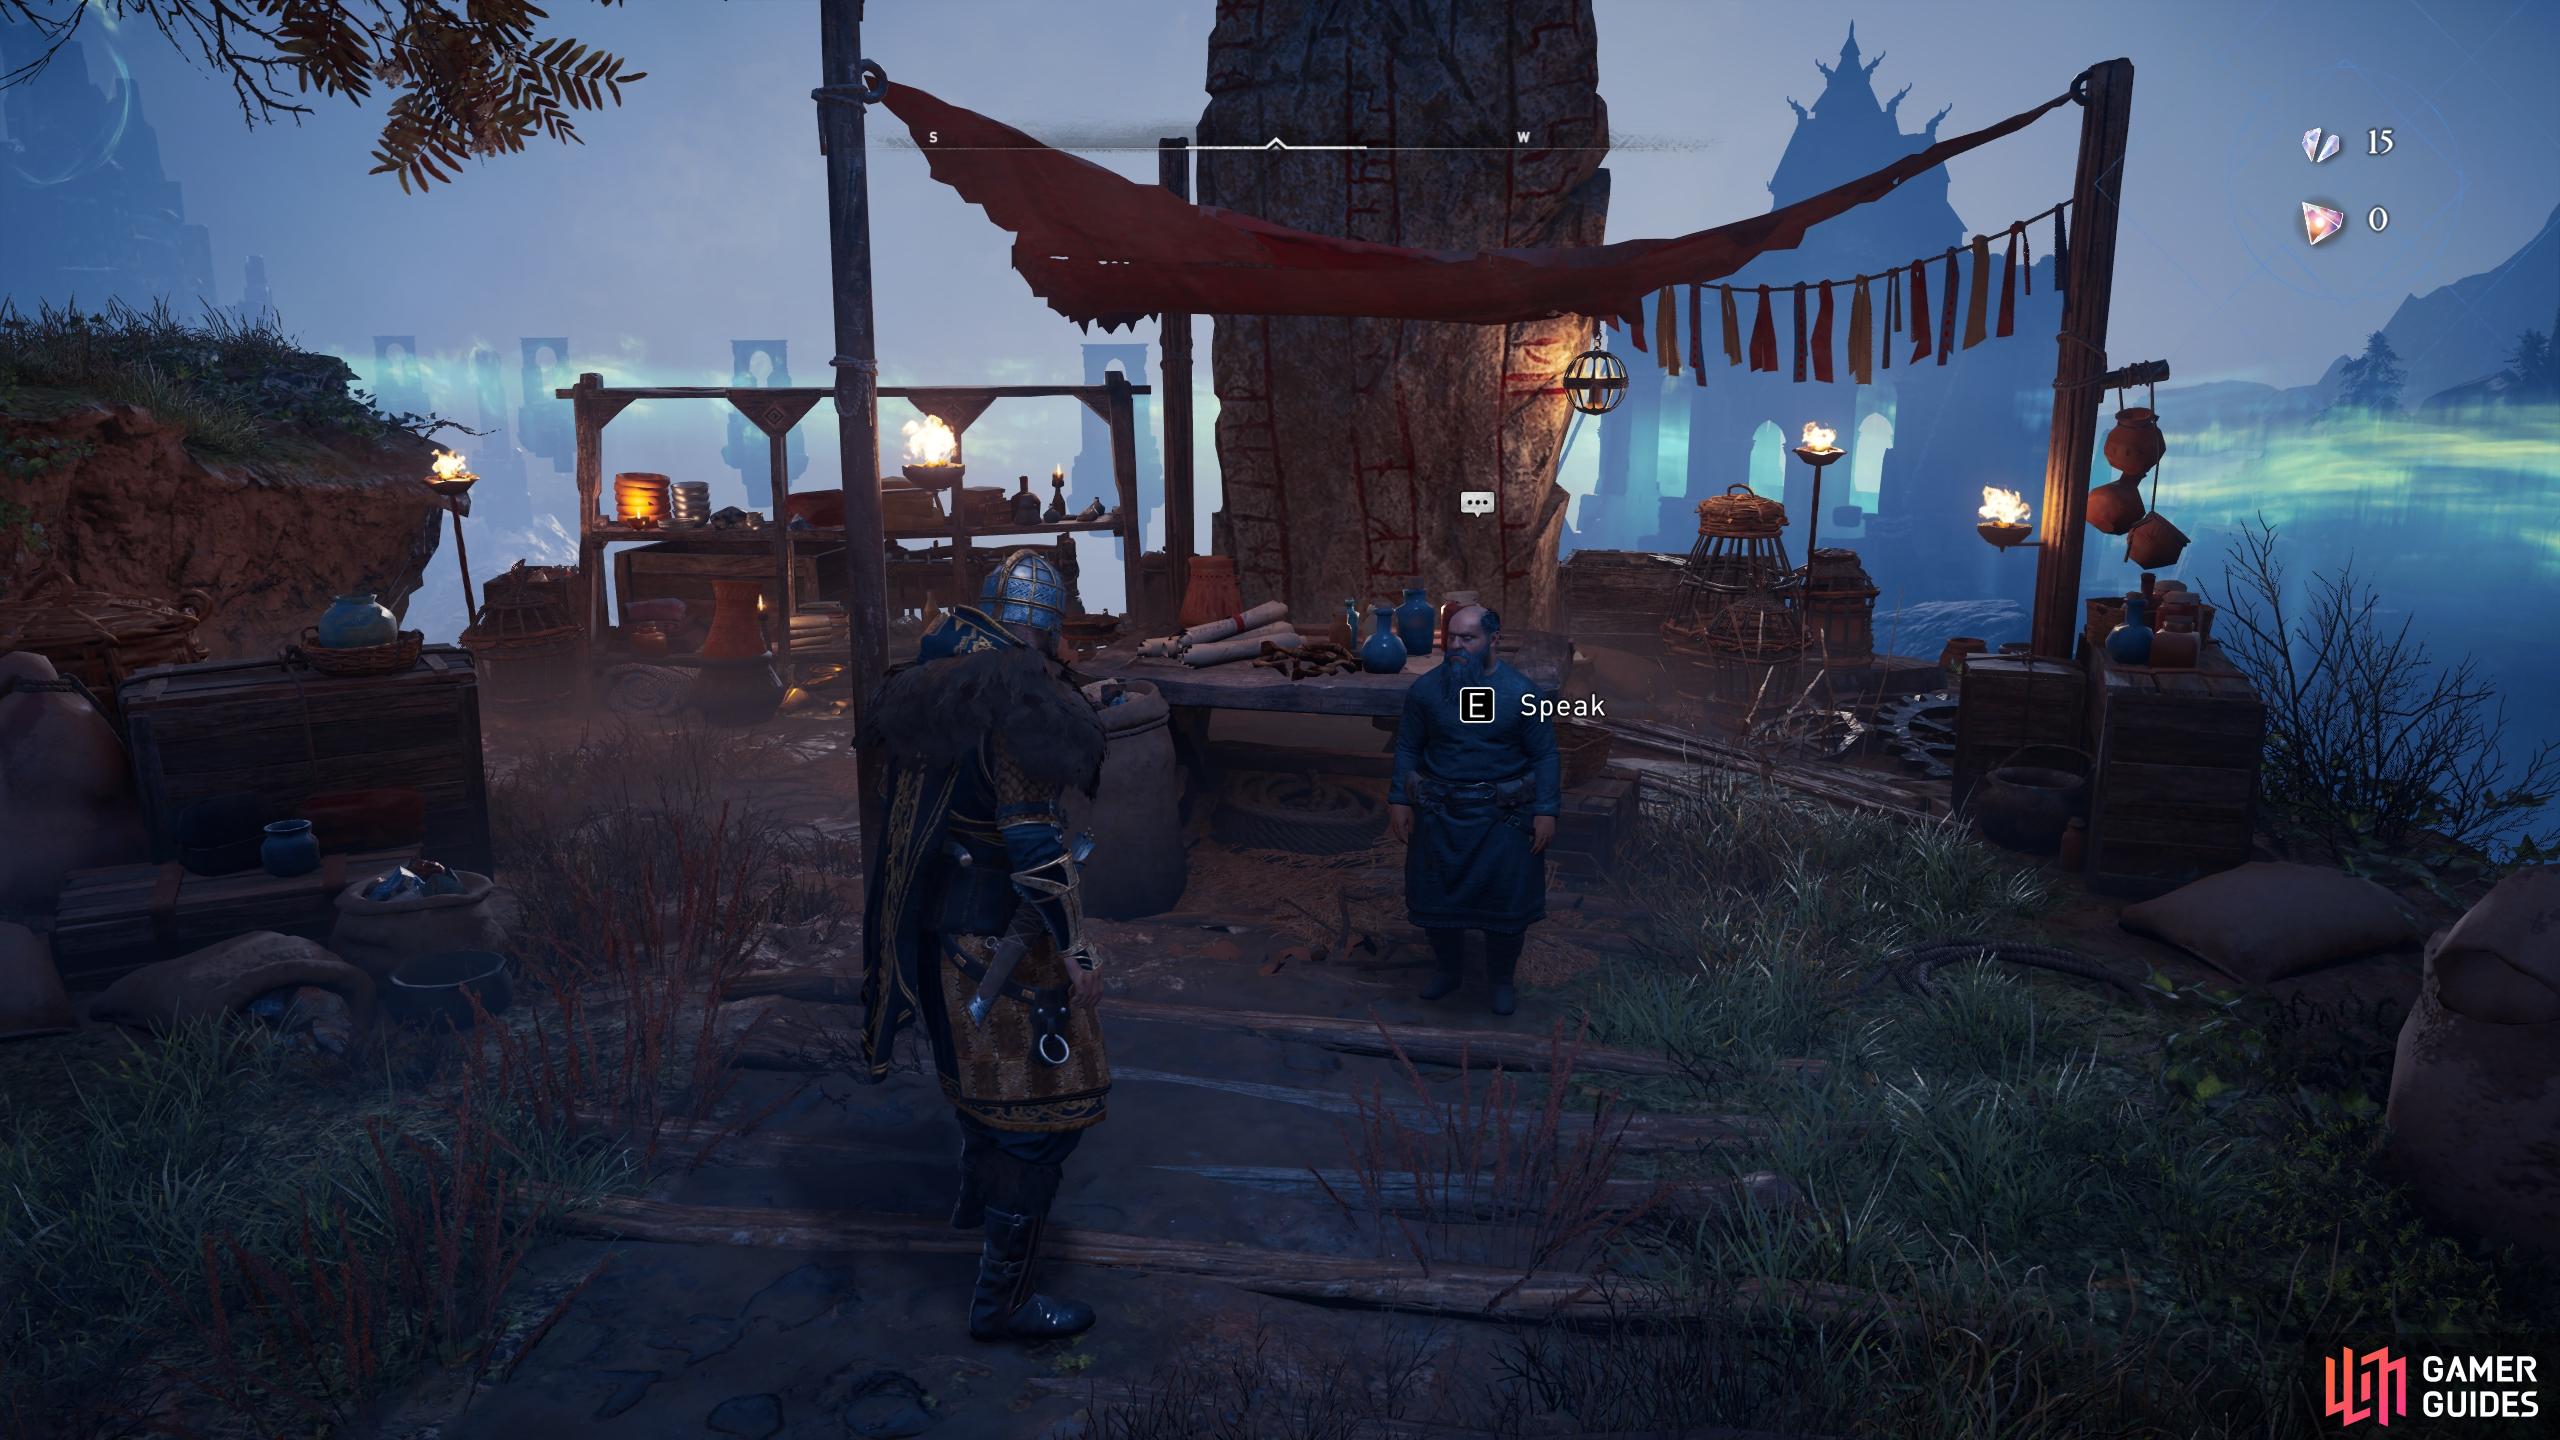 You'll find Nar opposite the outfitters in Odin's Camp.